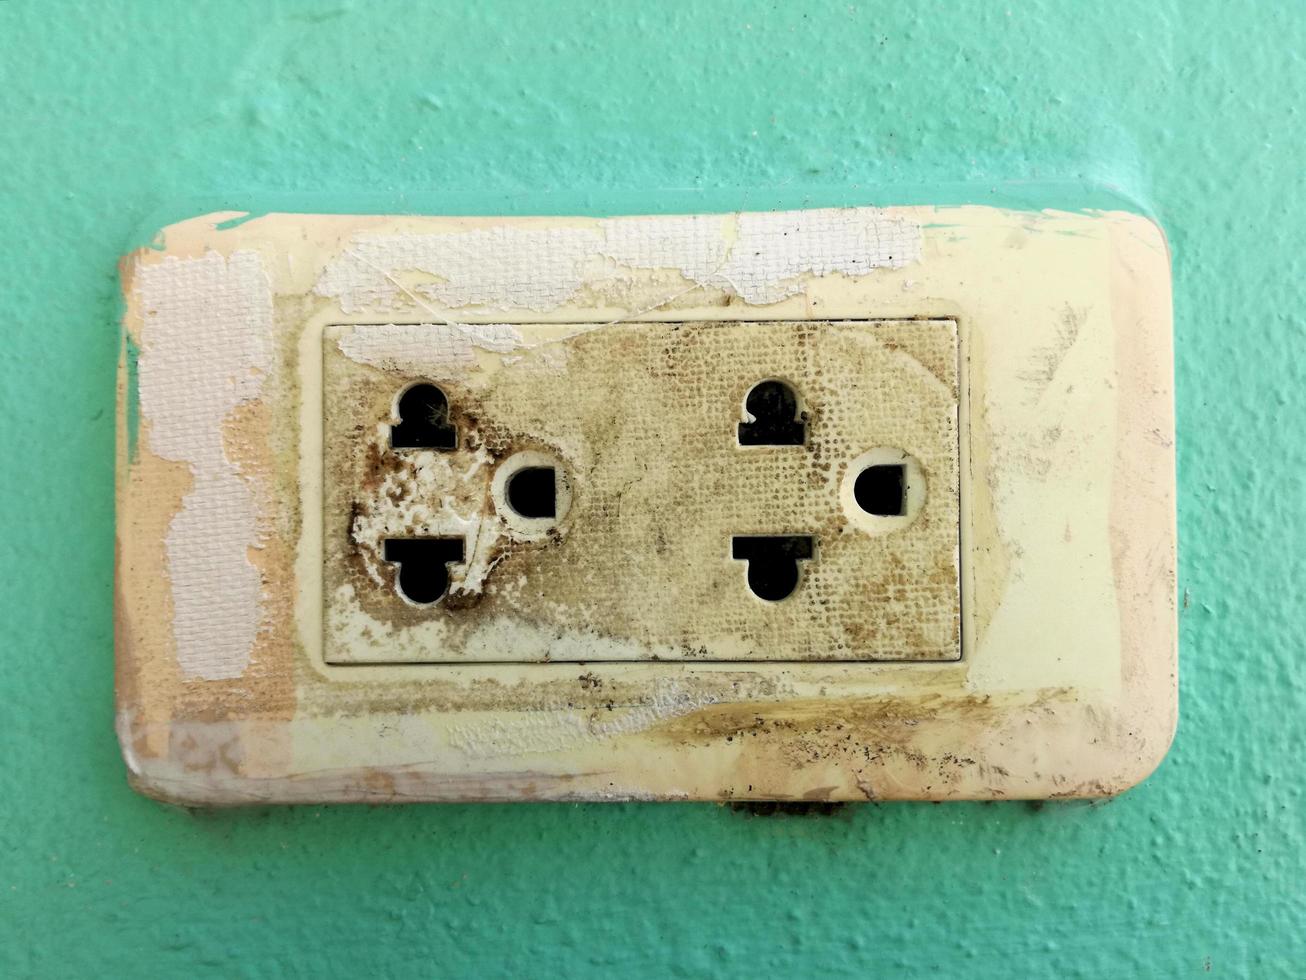 The old plastic power socket on the wall is dangerous. photo